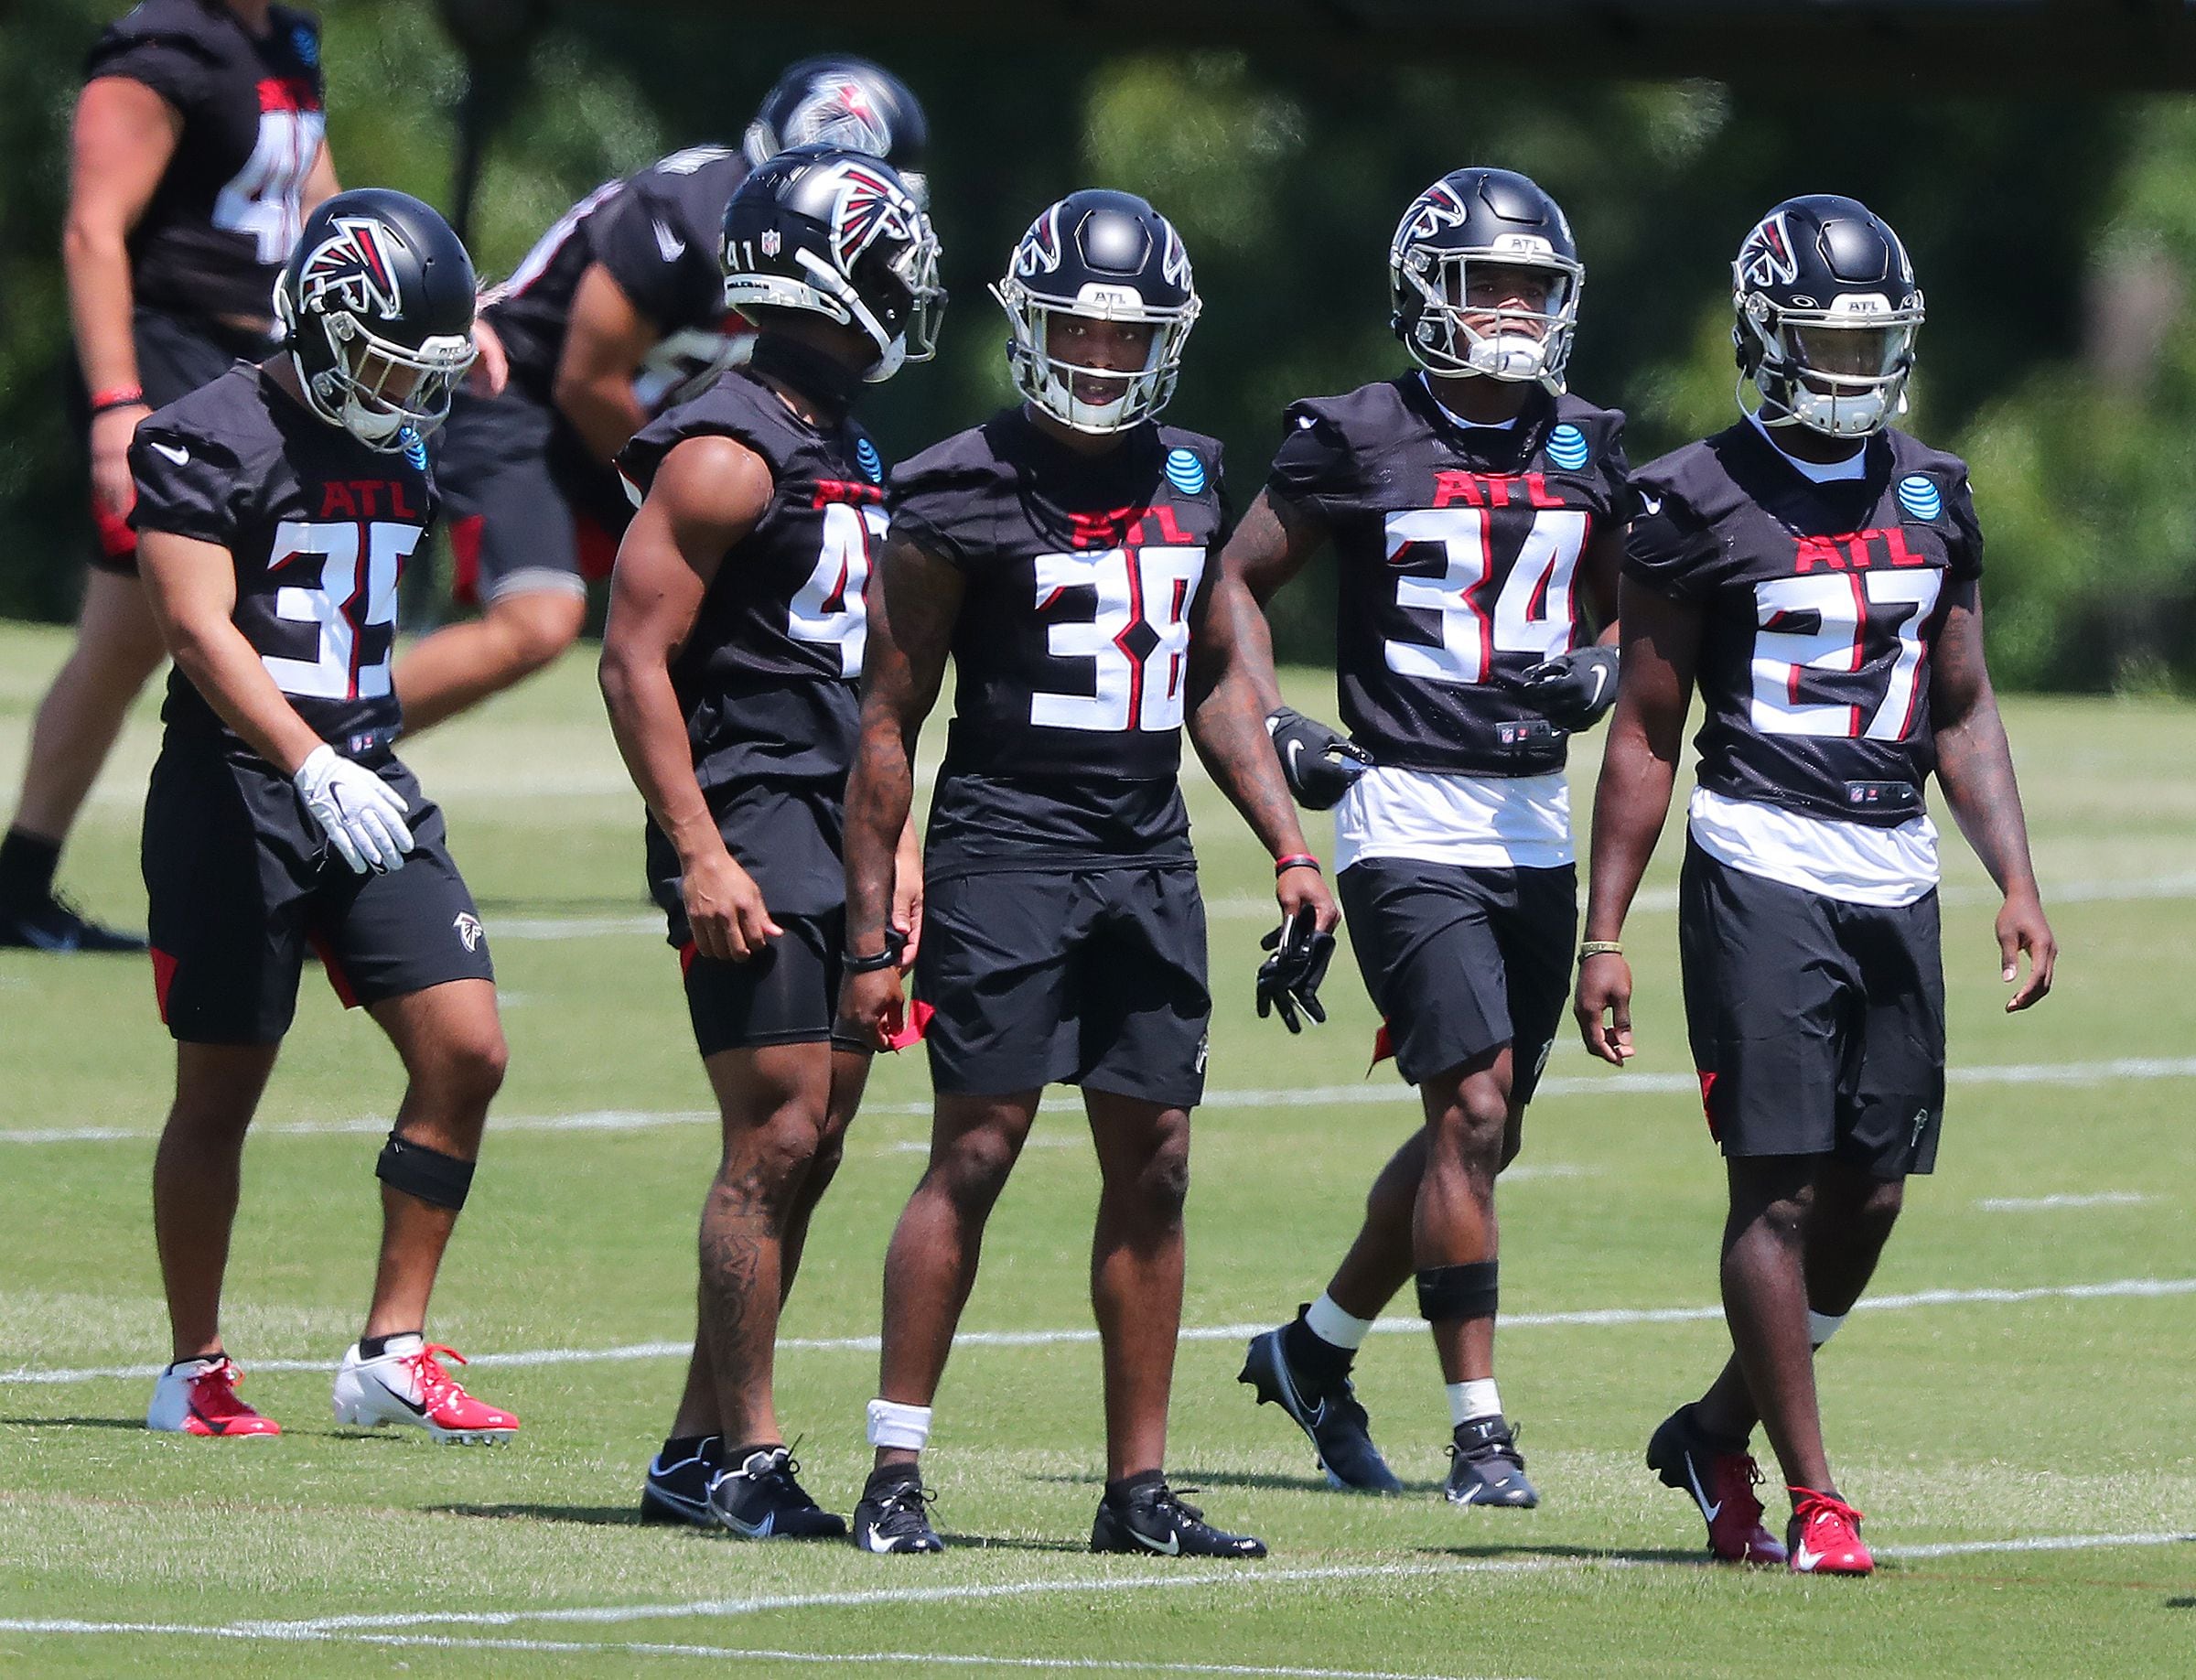 Falcons Release Official Depth Chart For Jets Game